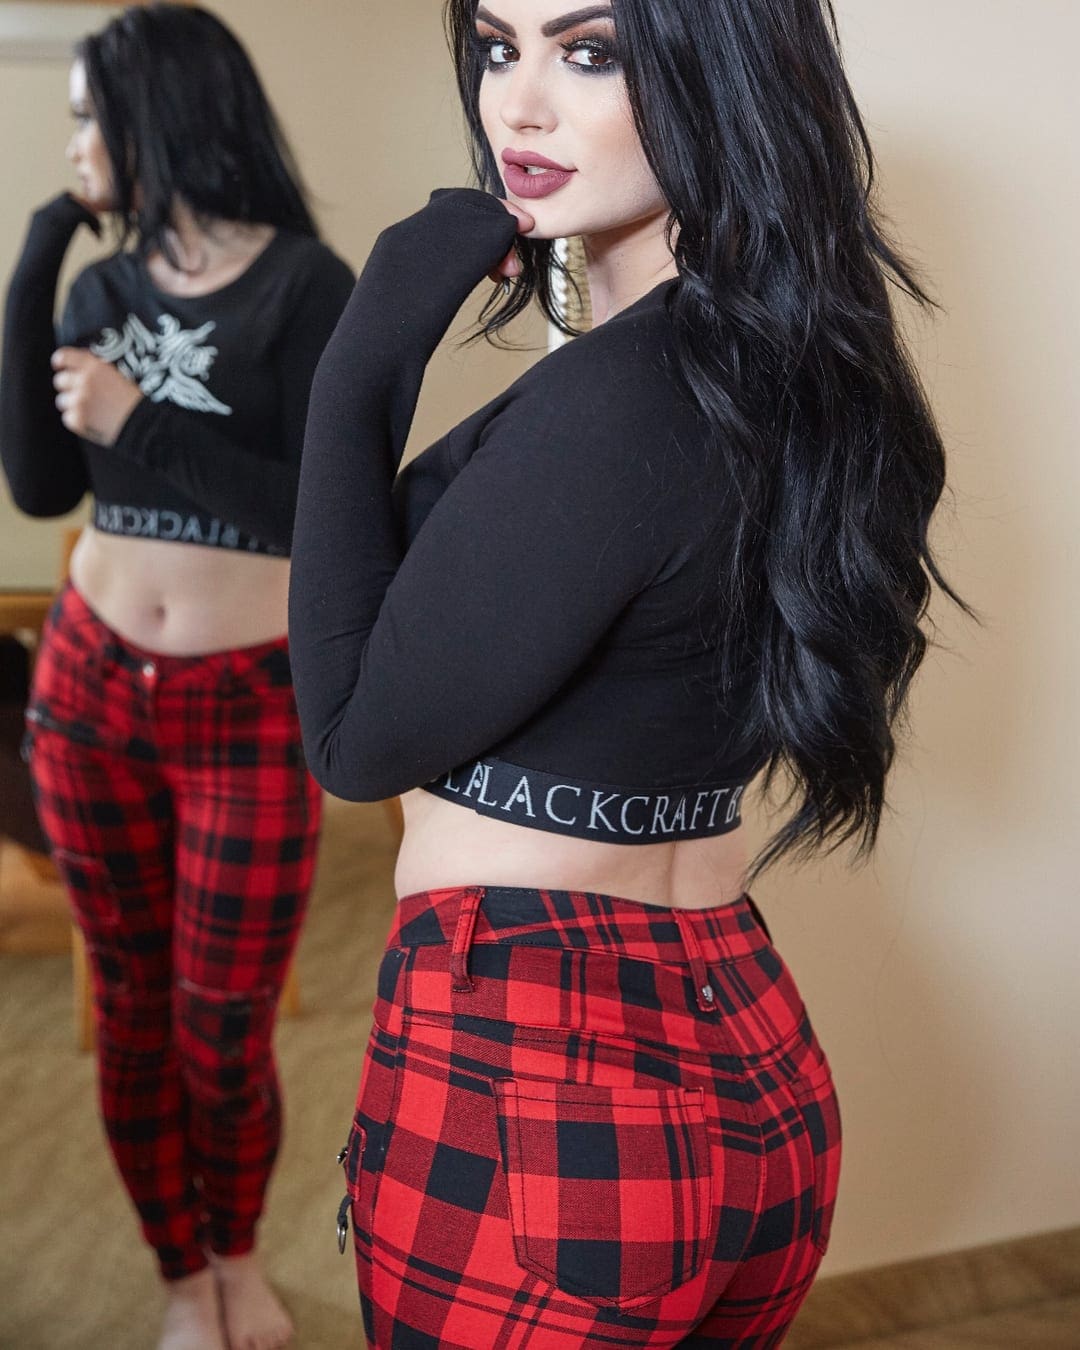 Paige Says Her Hot Topic Jeans Make Her Booty Look Good